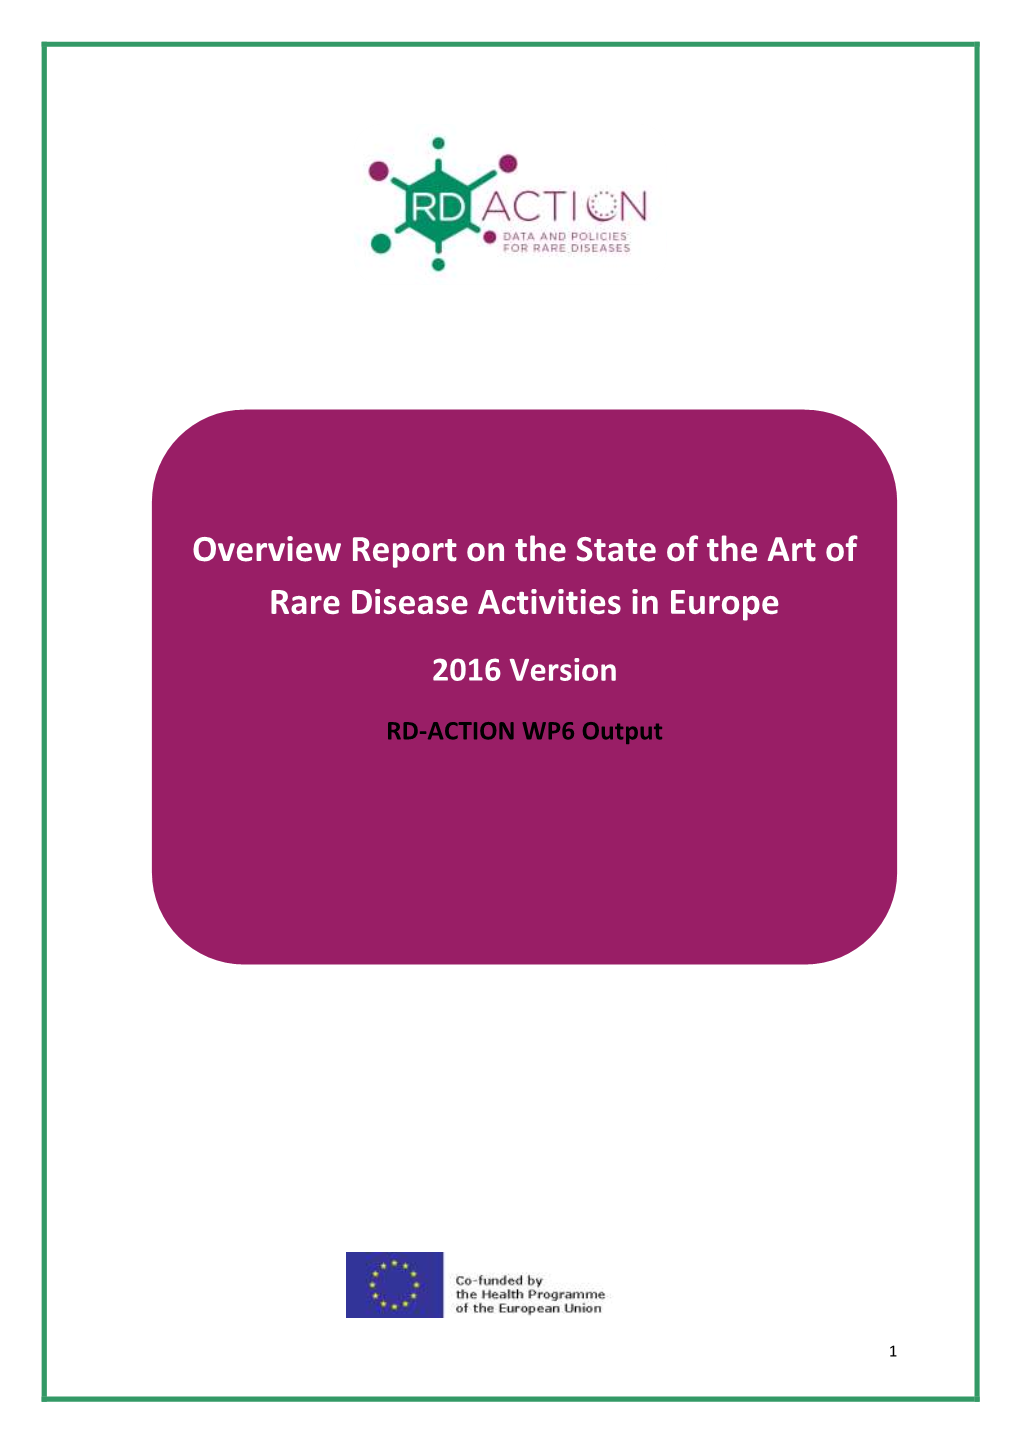 Overview Report on the State of the Art of Rare Disease Activities in Europe